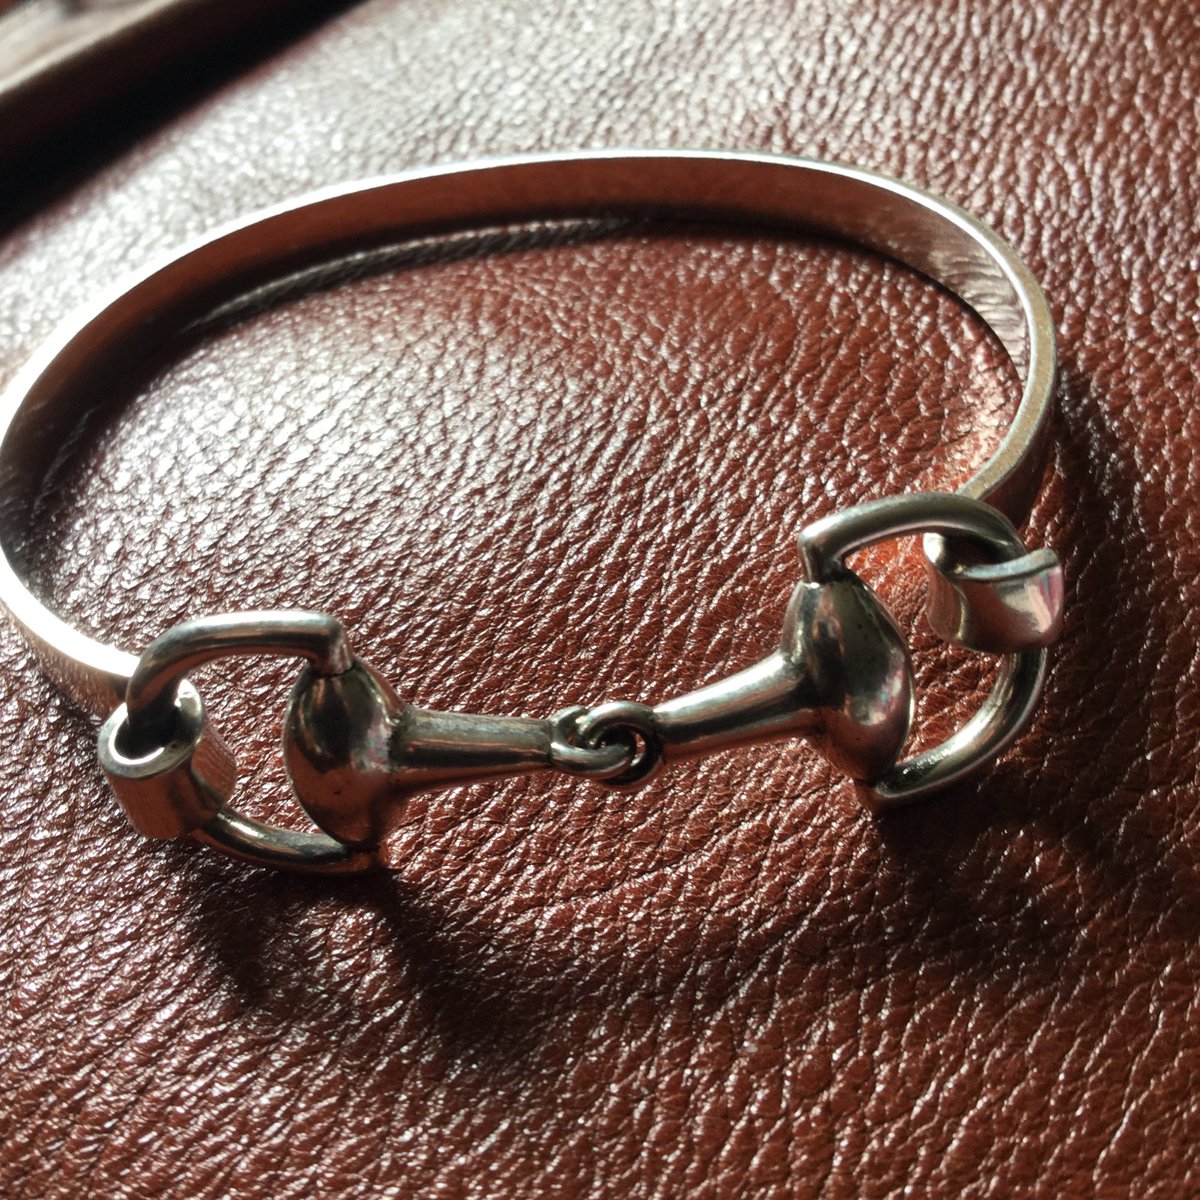 Really nice snaffle bit bracelets for sale in Eggsy’s Ko-fi shop with all proceeds going toward his care @ £12.99 each they make lovely gifts for yourself & a friend, free uk postage link in profile #earlybiz